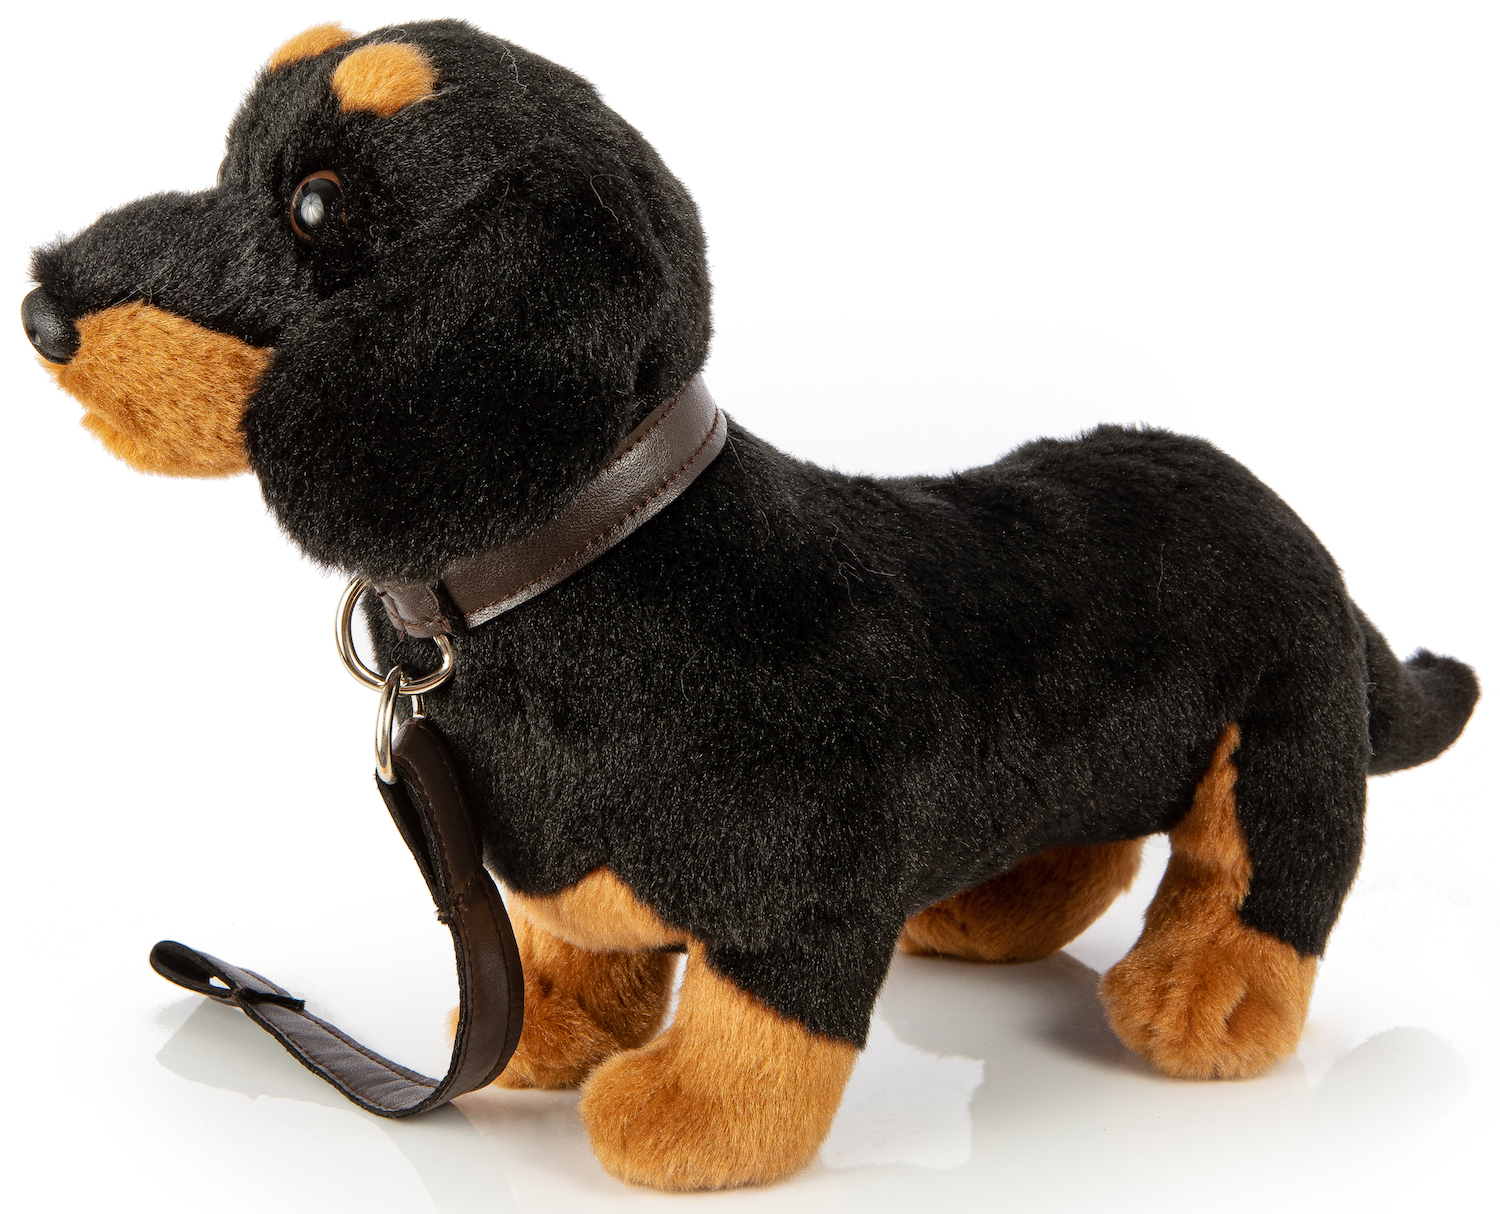 Dachshund with leash, standing